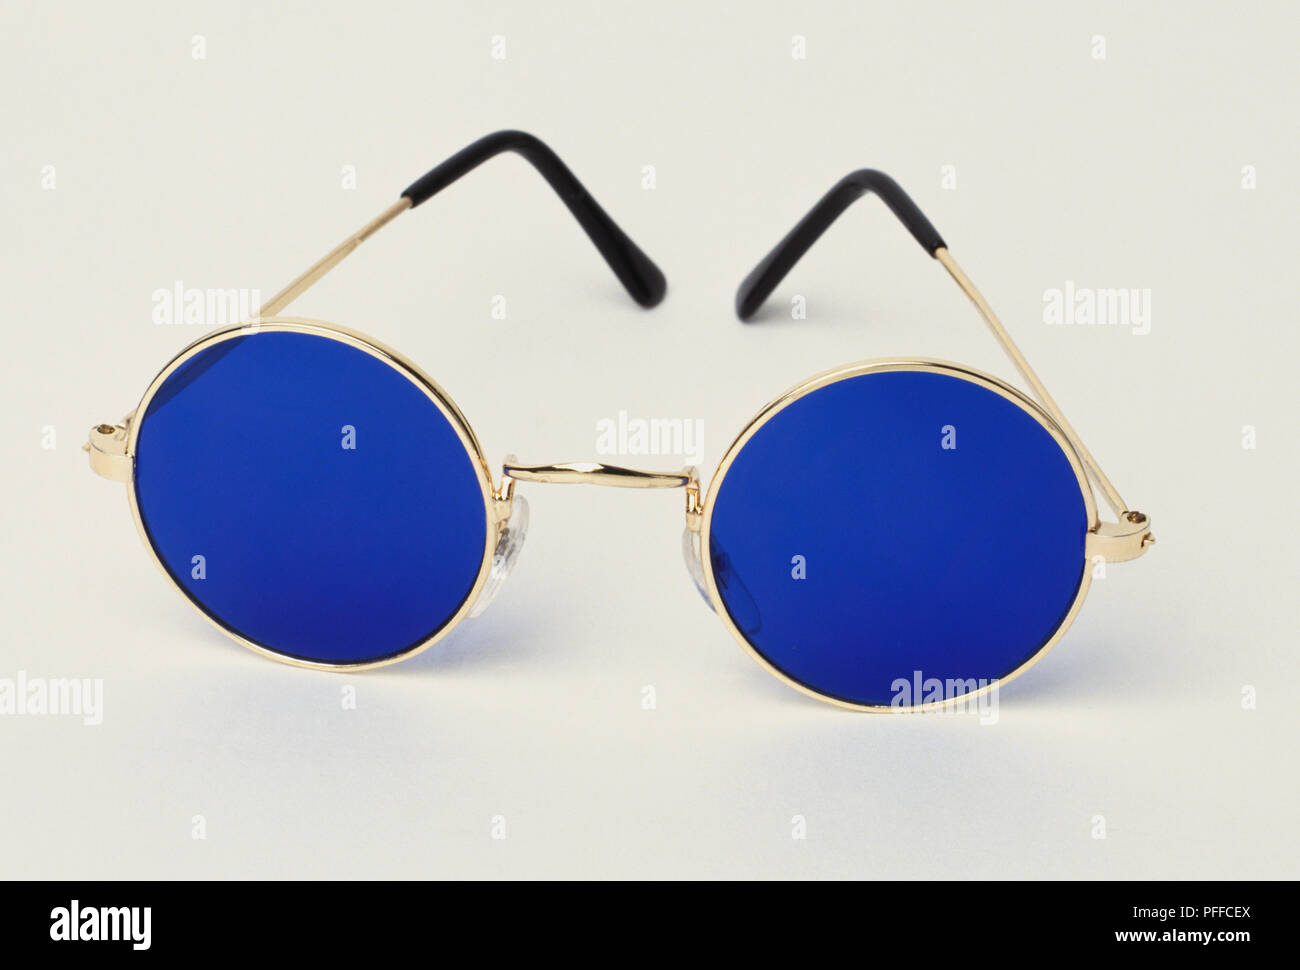 Buy Ray-Ban Ray-Ban Sunglasses | Transparent Blu Sunglasses ( 0Rb0840S |  Square | Blue Frame | Brown Lens ) Sunglasses Online.